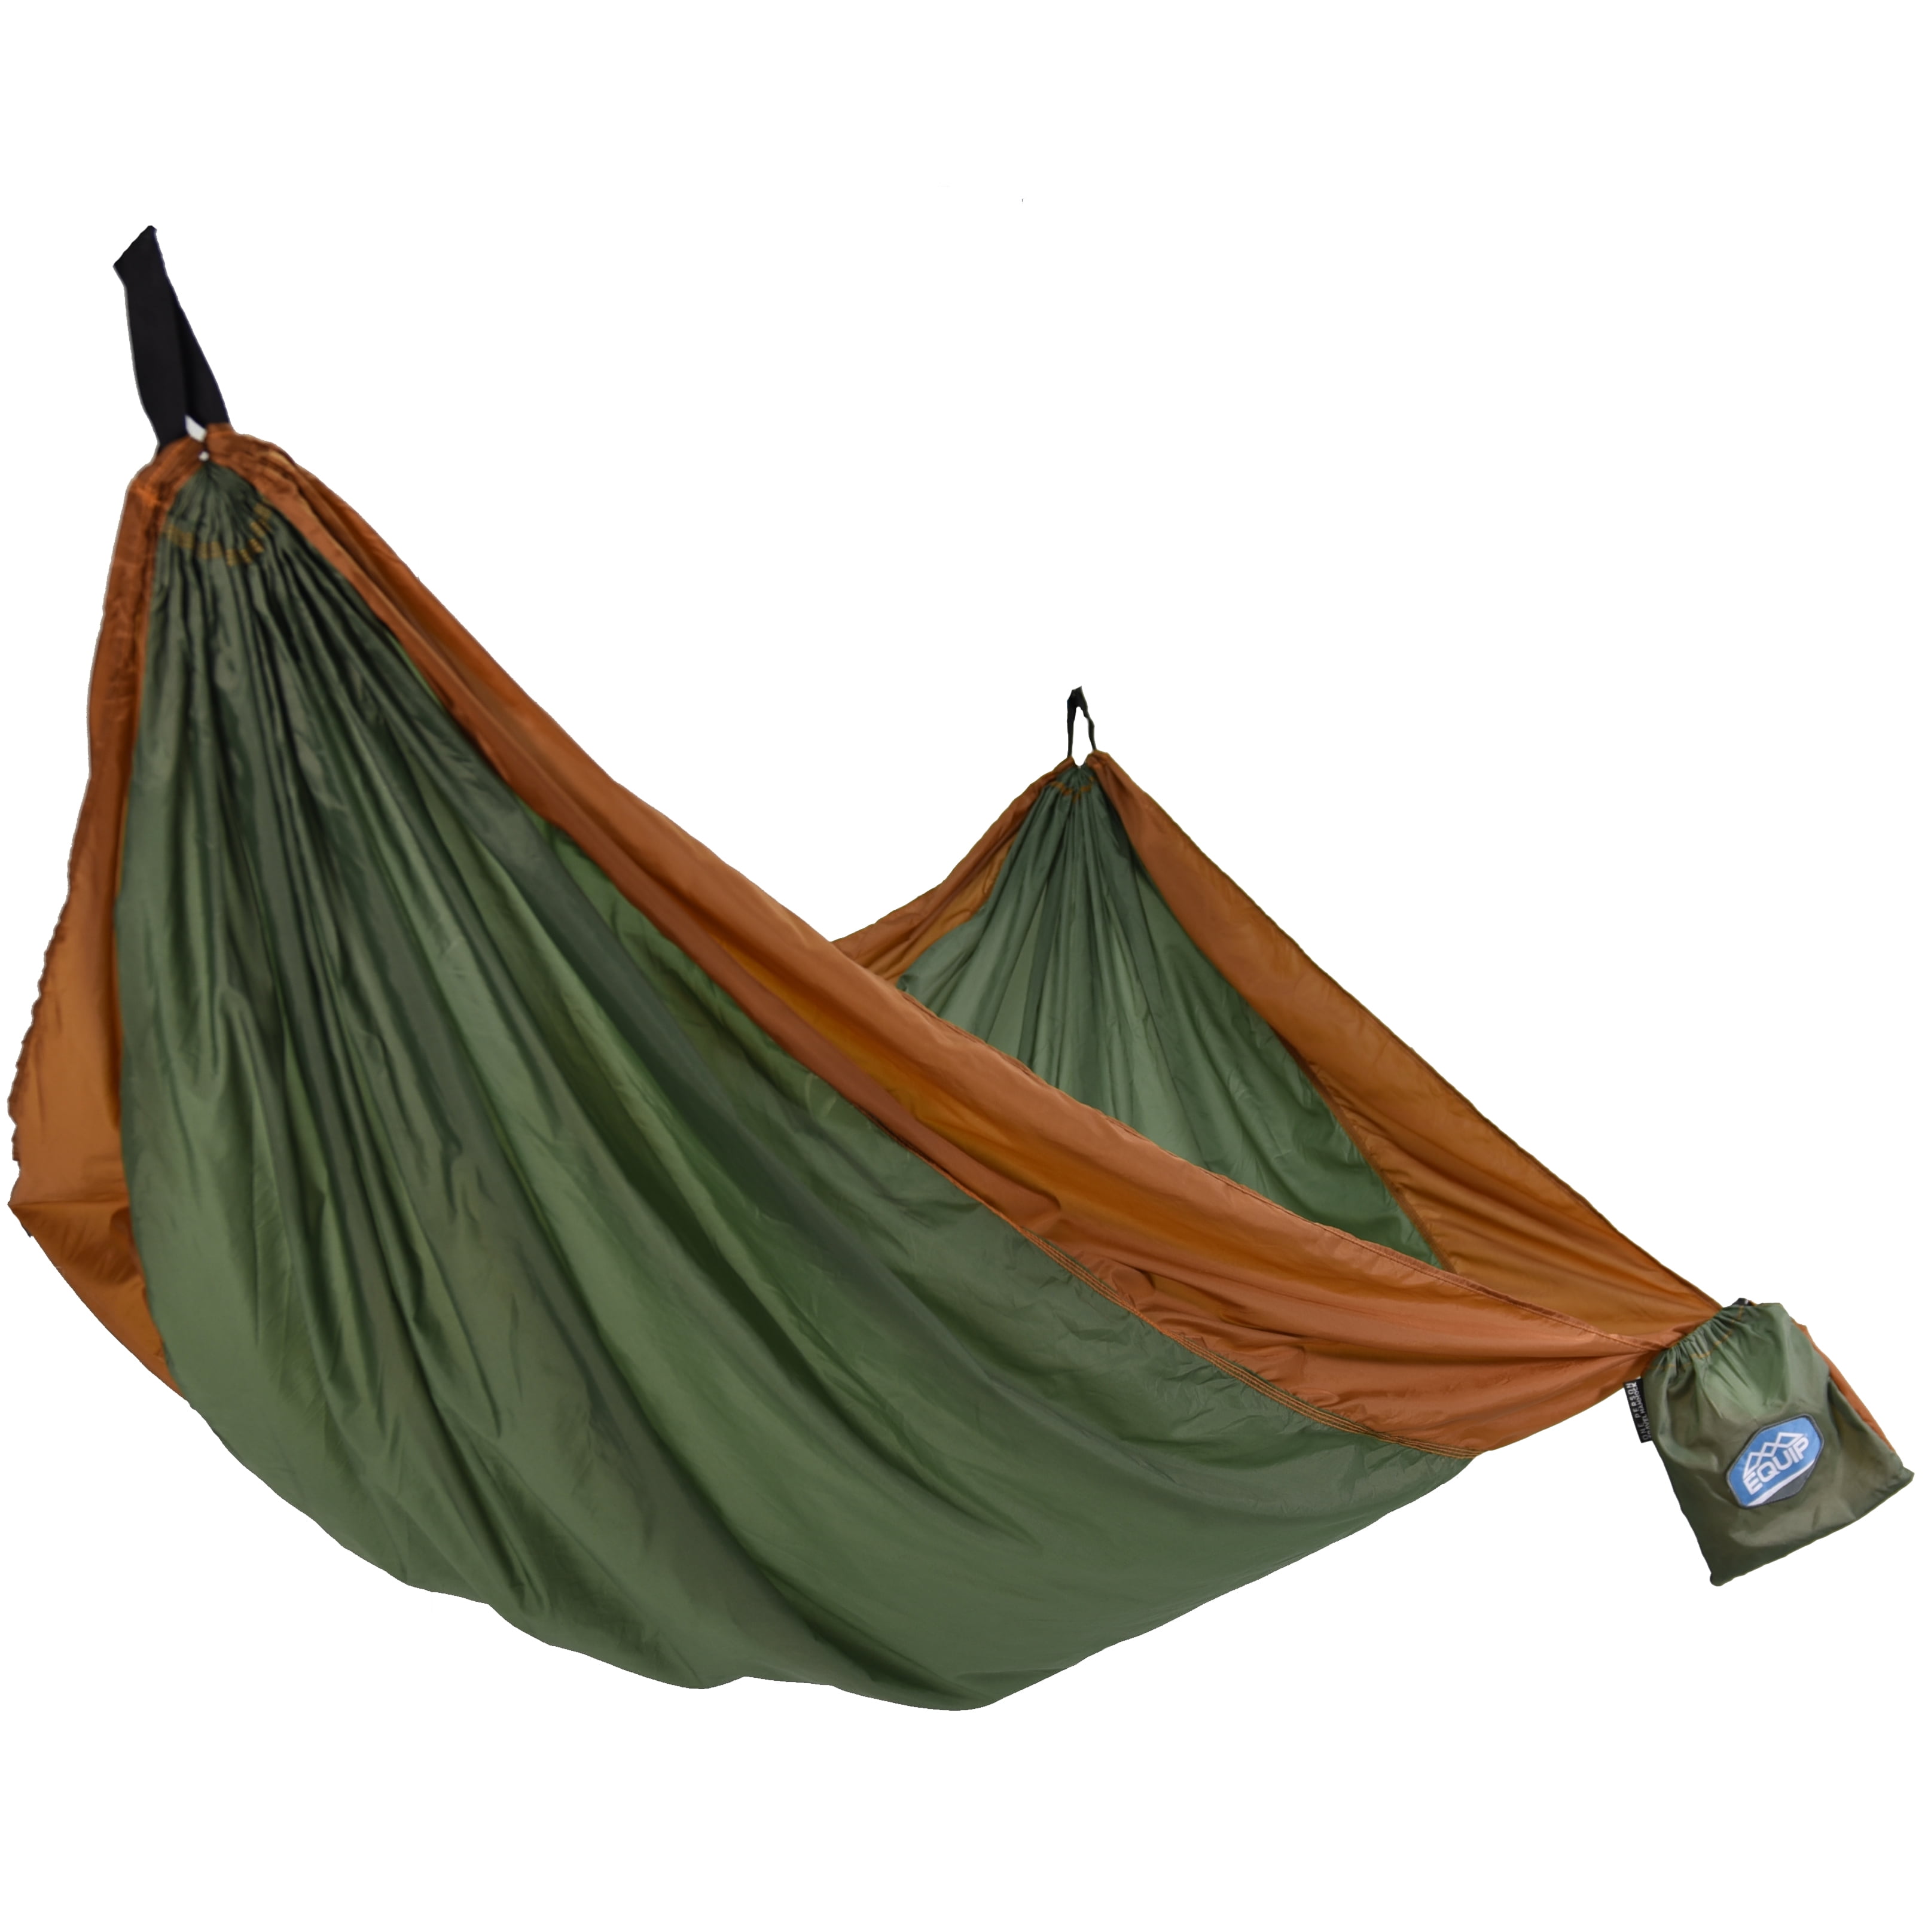 Equip Nylon Portable Camping Travel Hammock, One Person Sage Green and Rust, Assembled Size 116 in. L x  in.  W